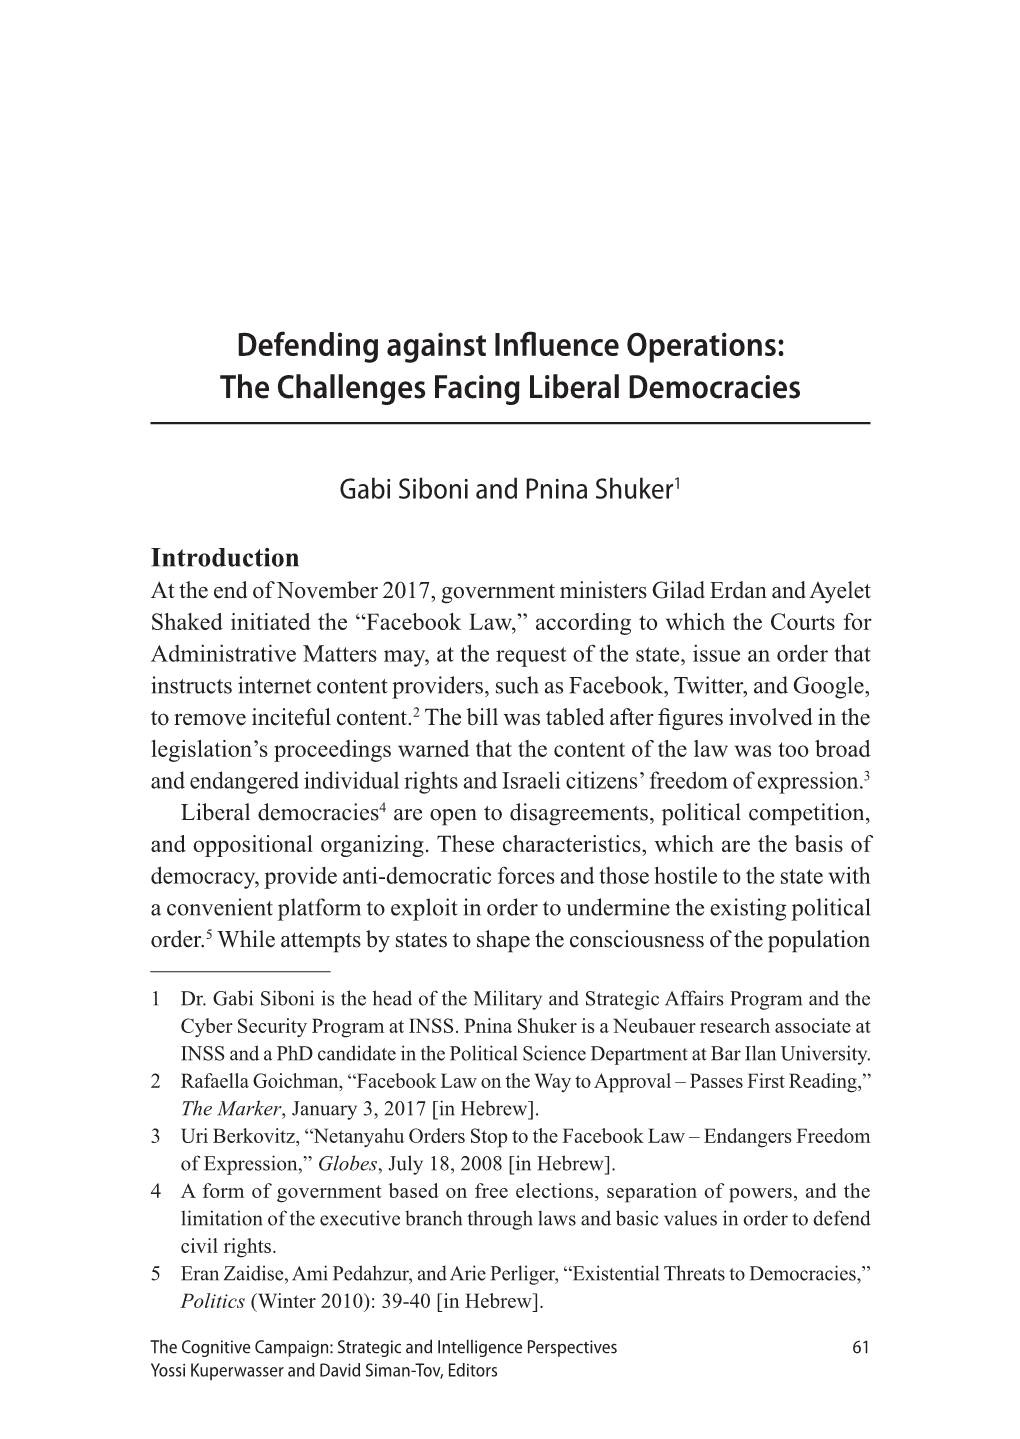 Defending Against Influence Operations: the Challenges Facing Liberal Democracies